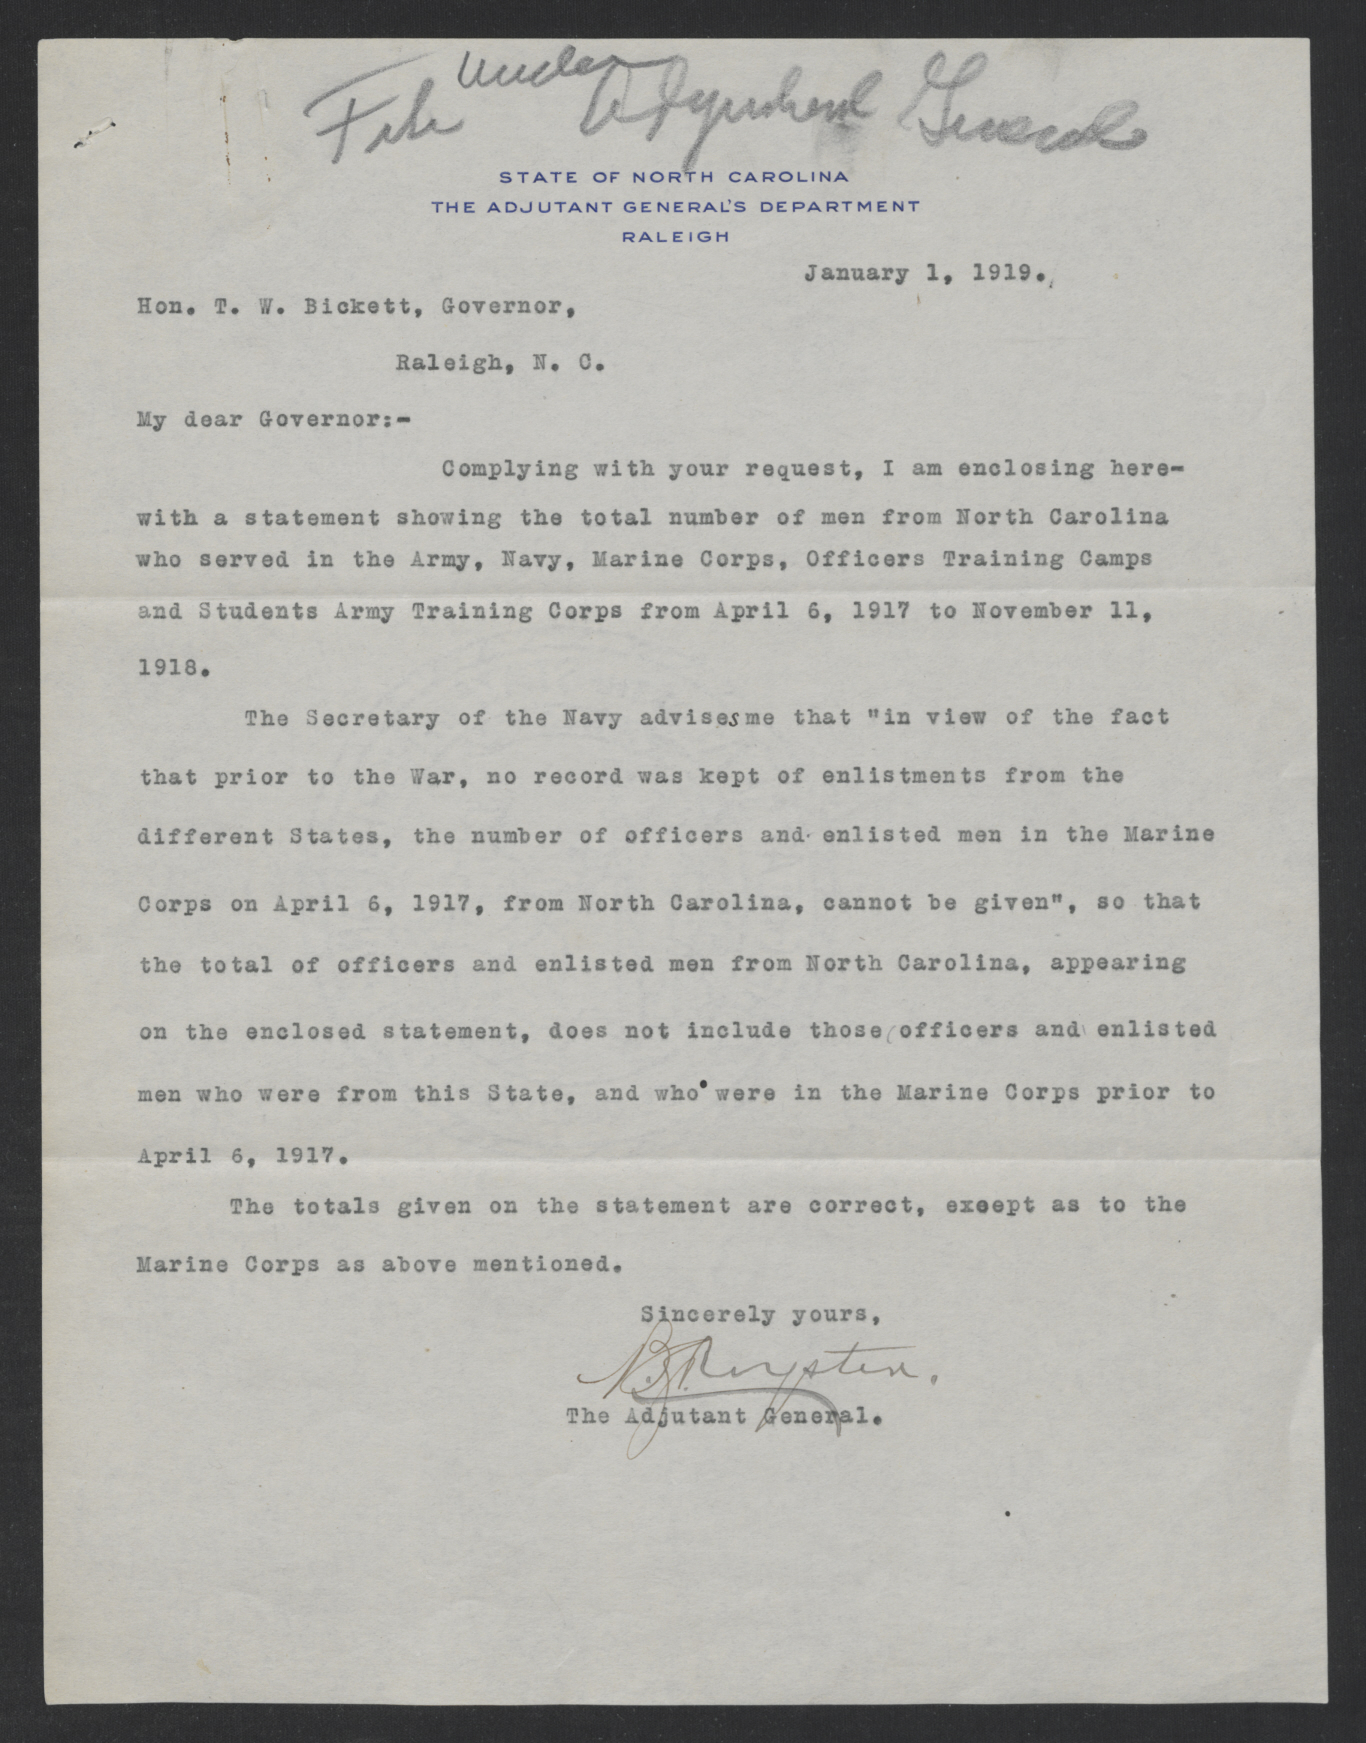 Letter from Beverly S. Royster to Thomas W. Bickett, January 1, 1919